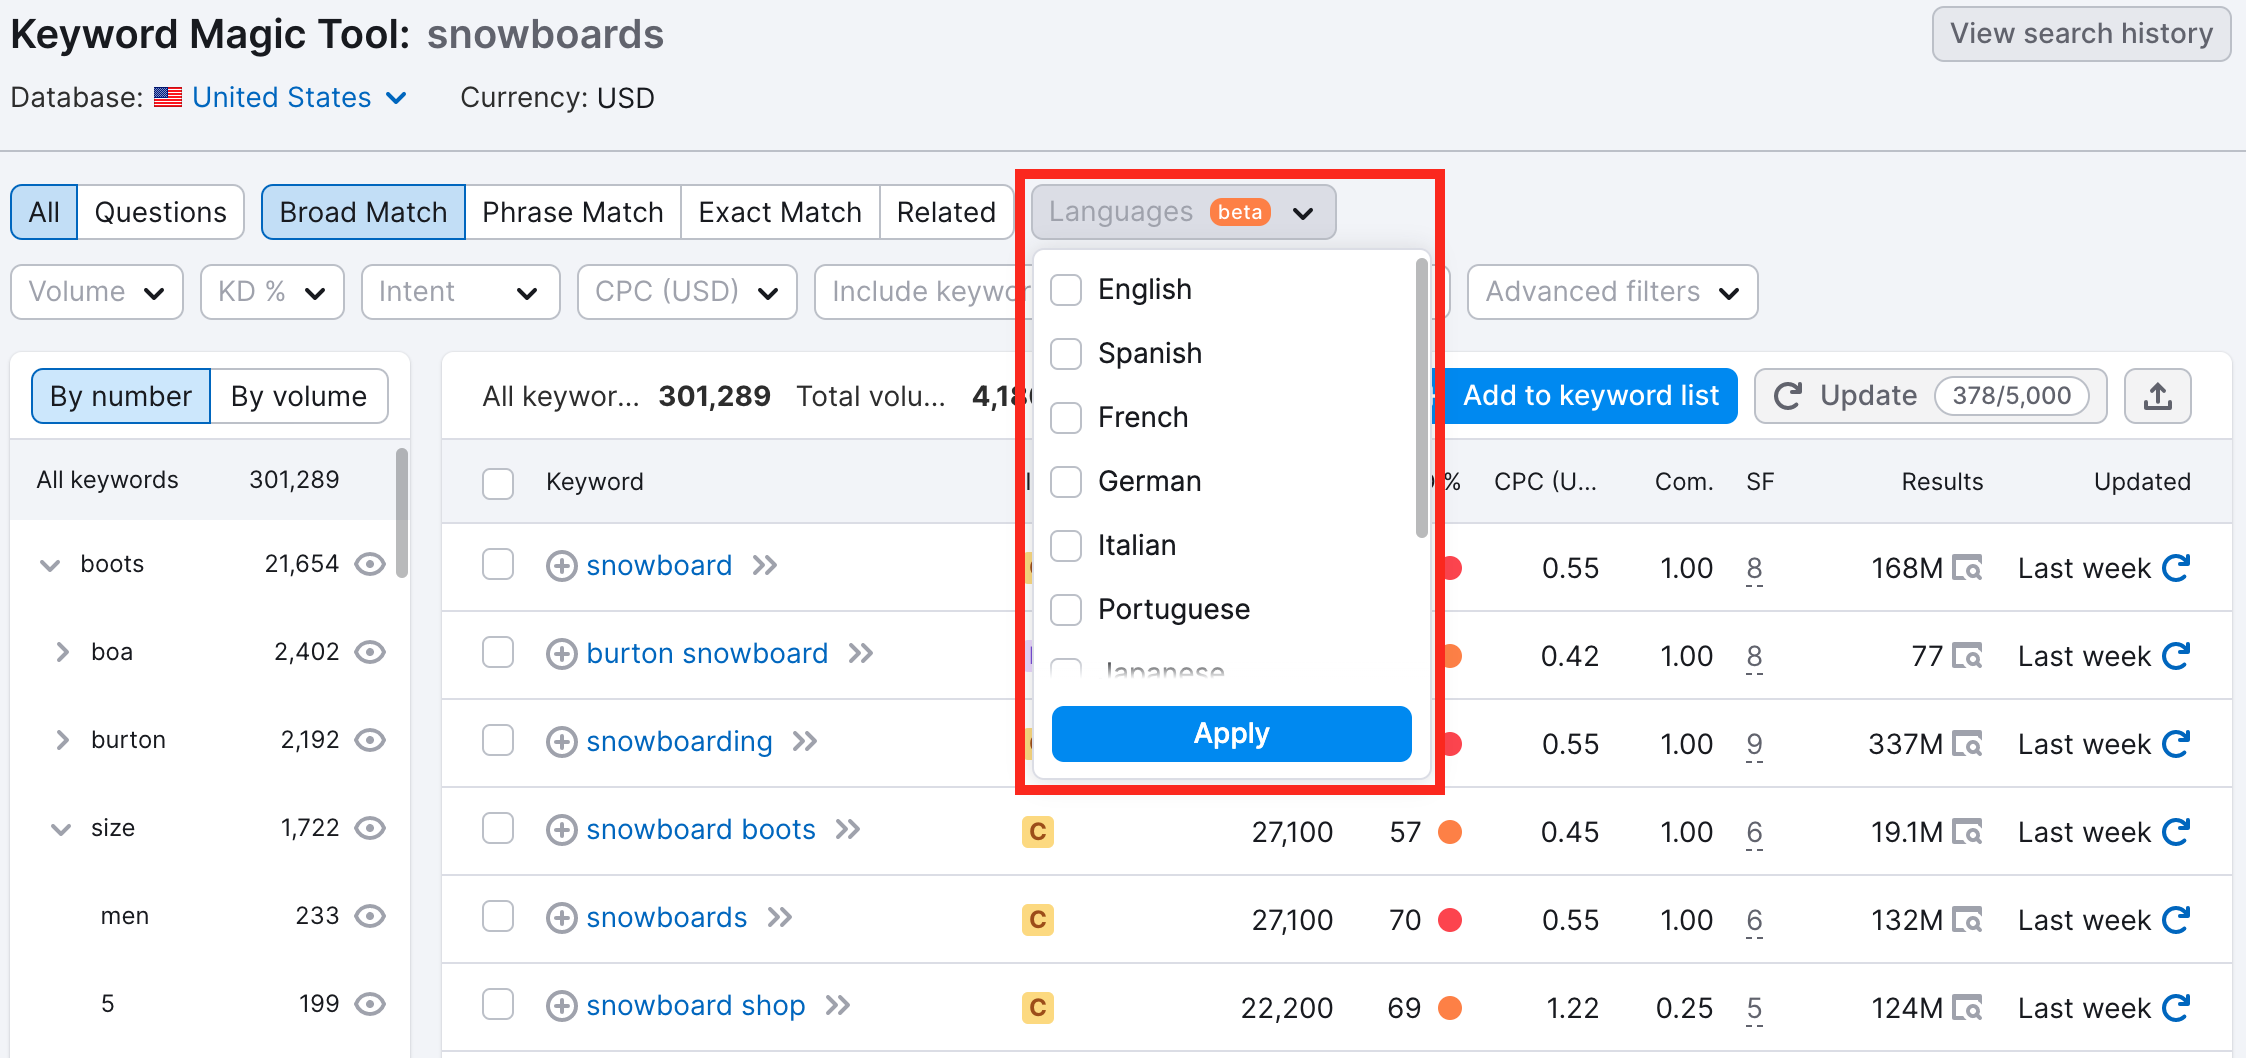 Keyword Magic Tool dashboard with a red rectangle highlighting the languages filter when opened up. 